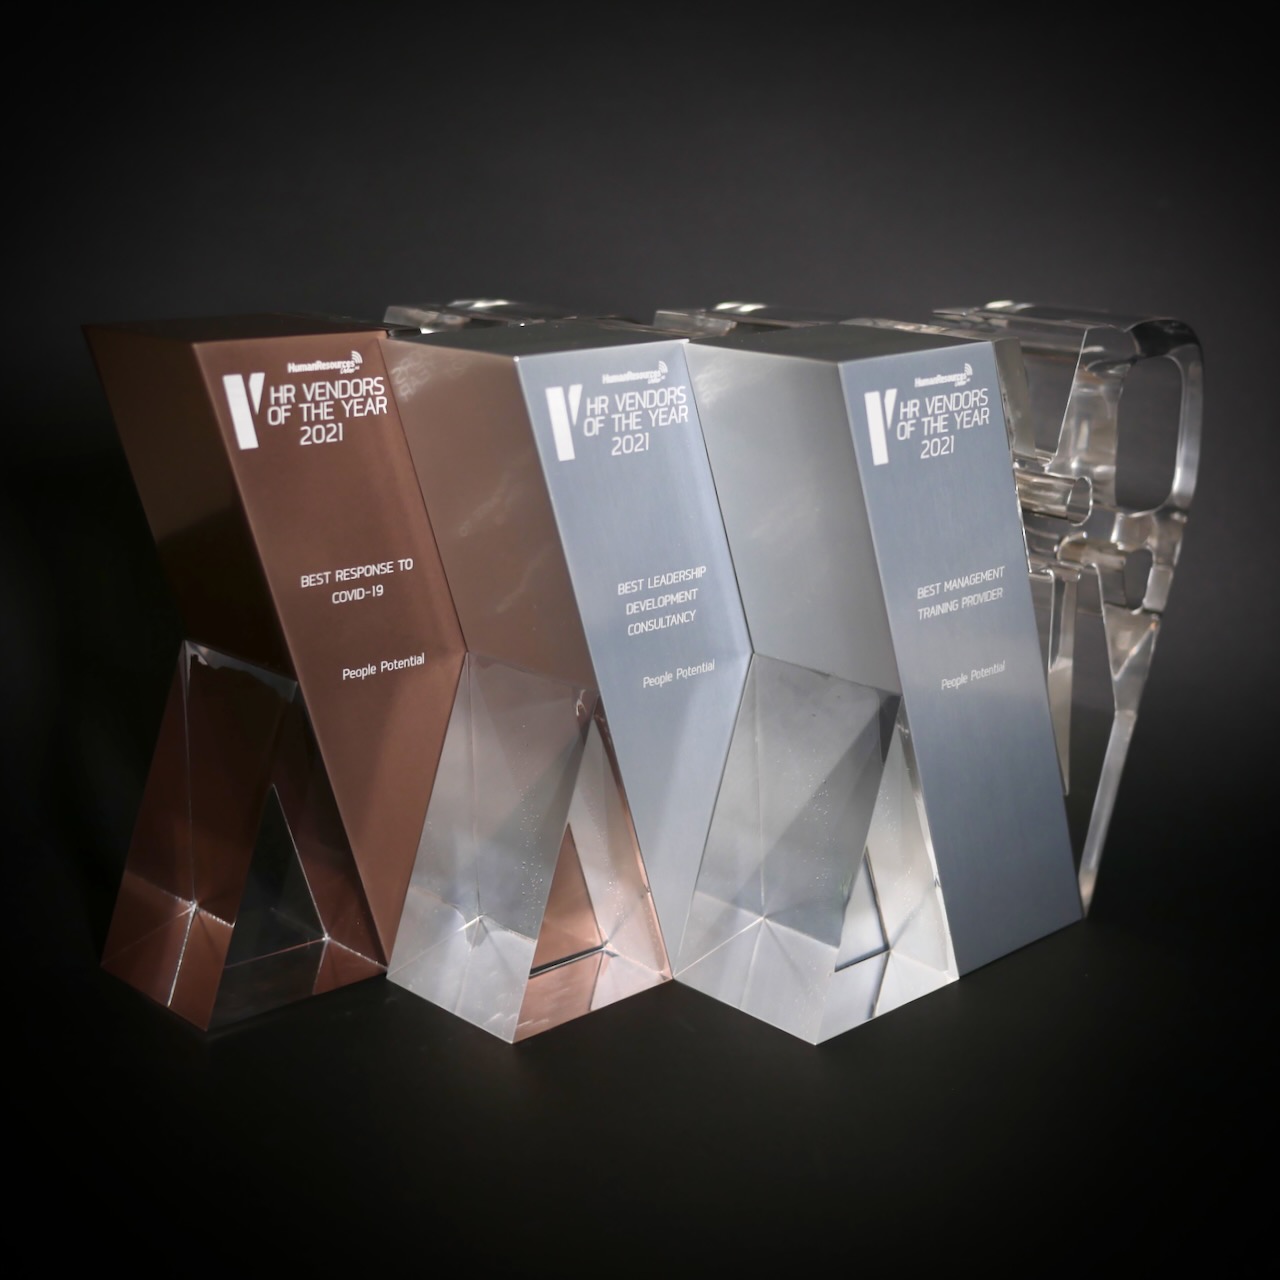 A gold and two silver trophies from HR Vendors of the Year 2021